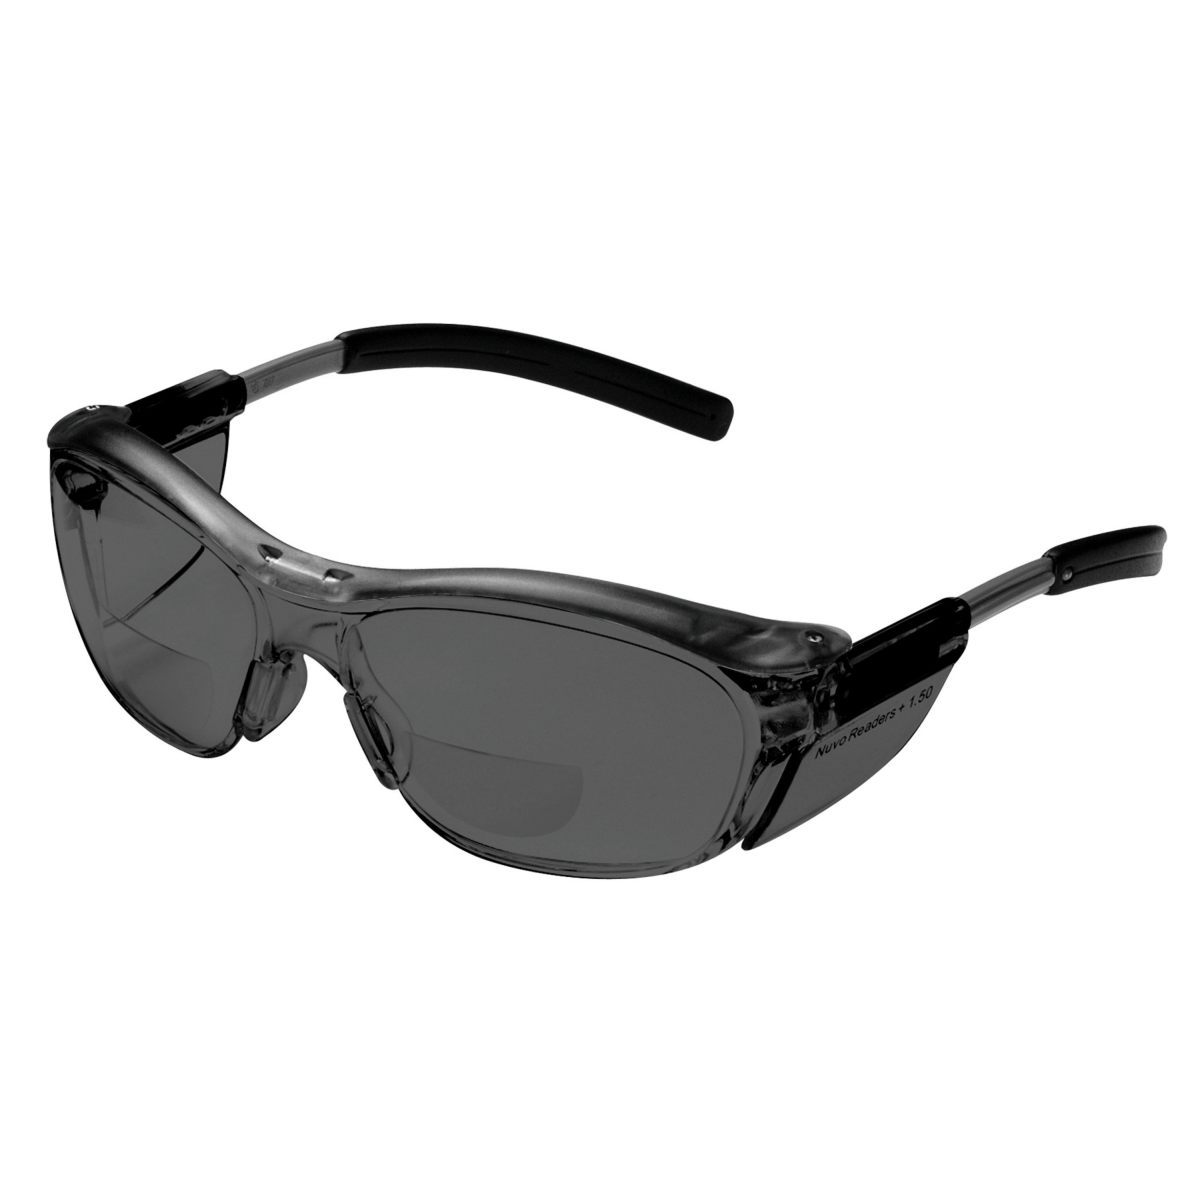 3M™ Nuvo™ Reader Protective Eyewear 11500-00000-20 Gray Lens, Gray Frame, +1.5 Diopter (Availability restrictions apply.)